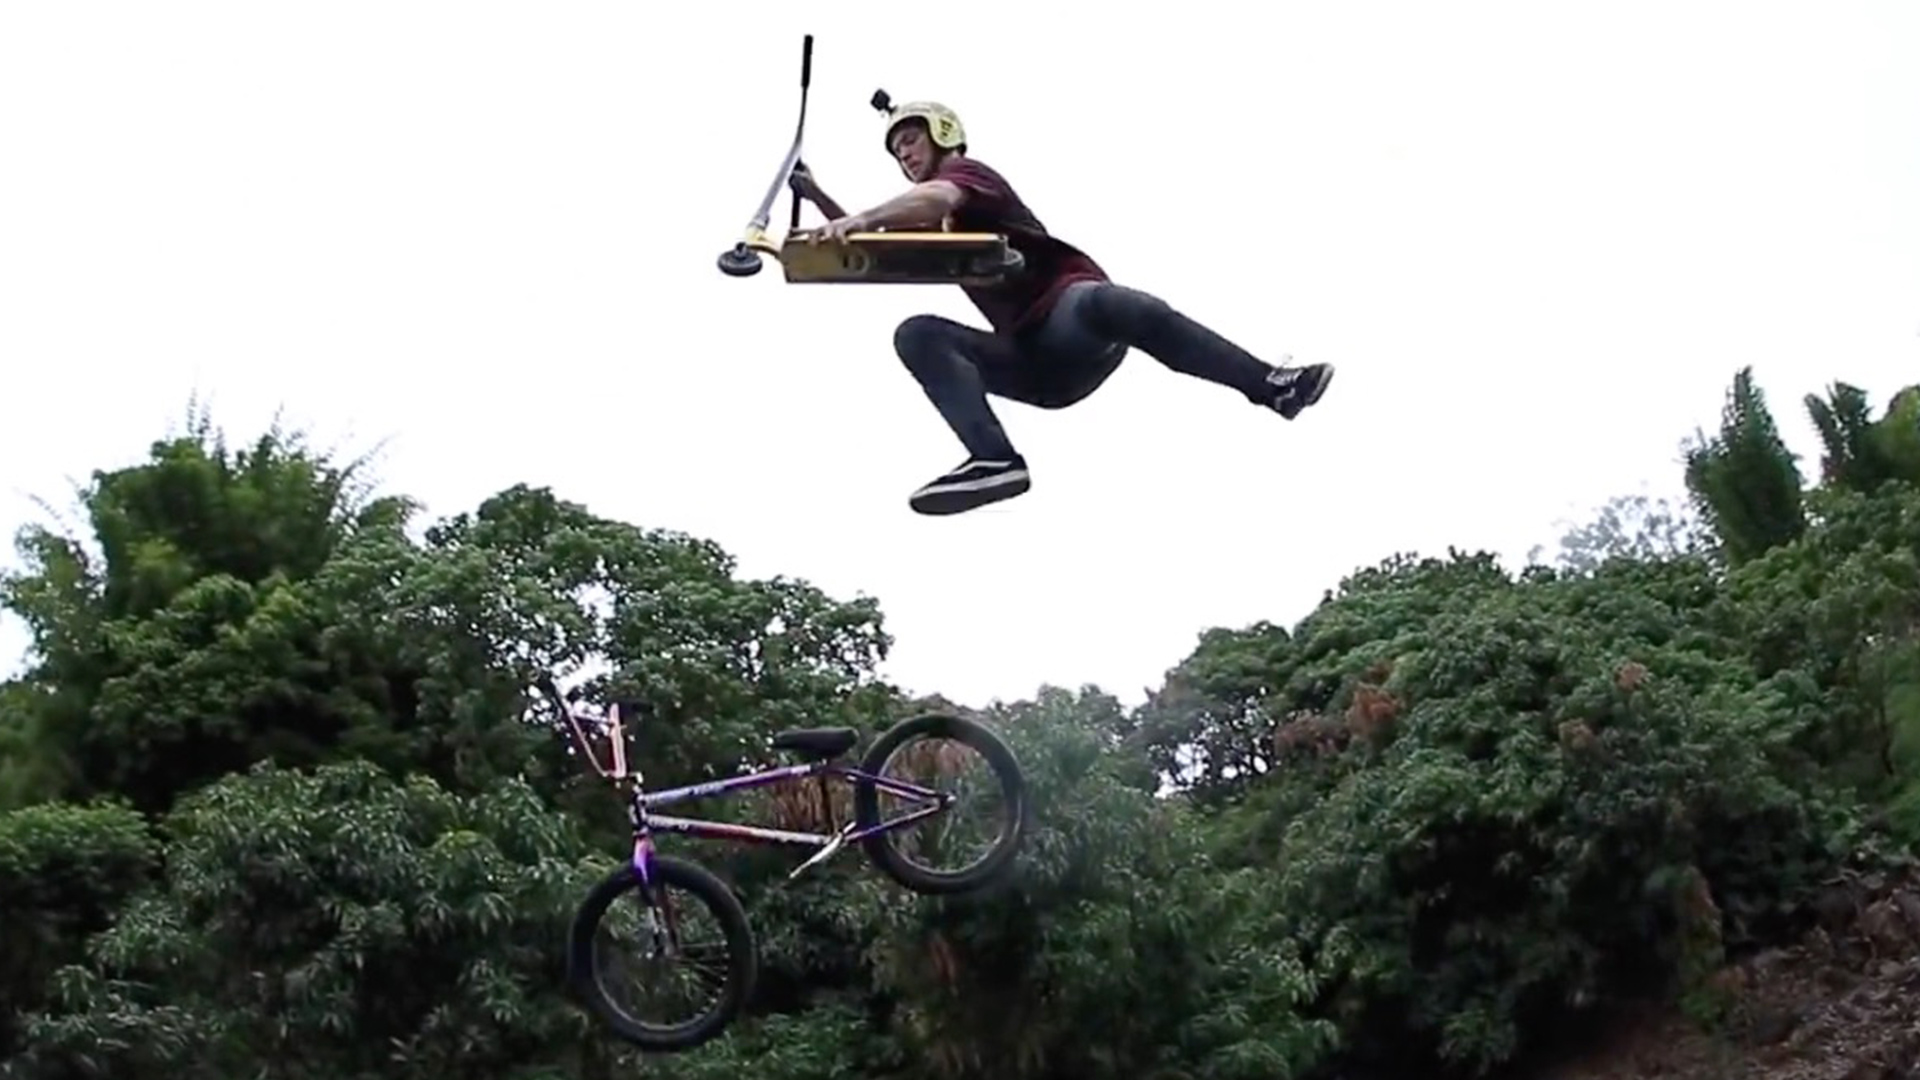 Ryan Williams Transfers From Bike To Scooter Mid-Air In Insane Trick